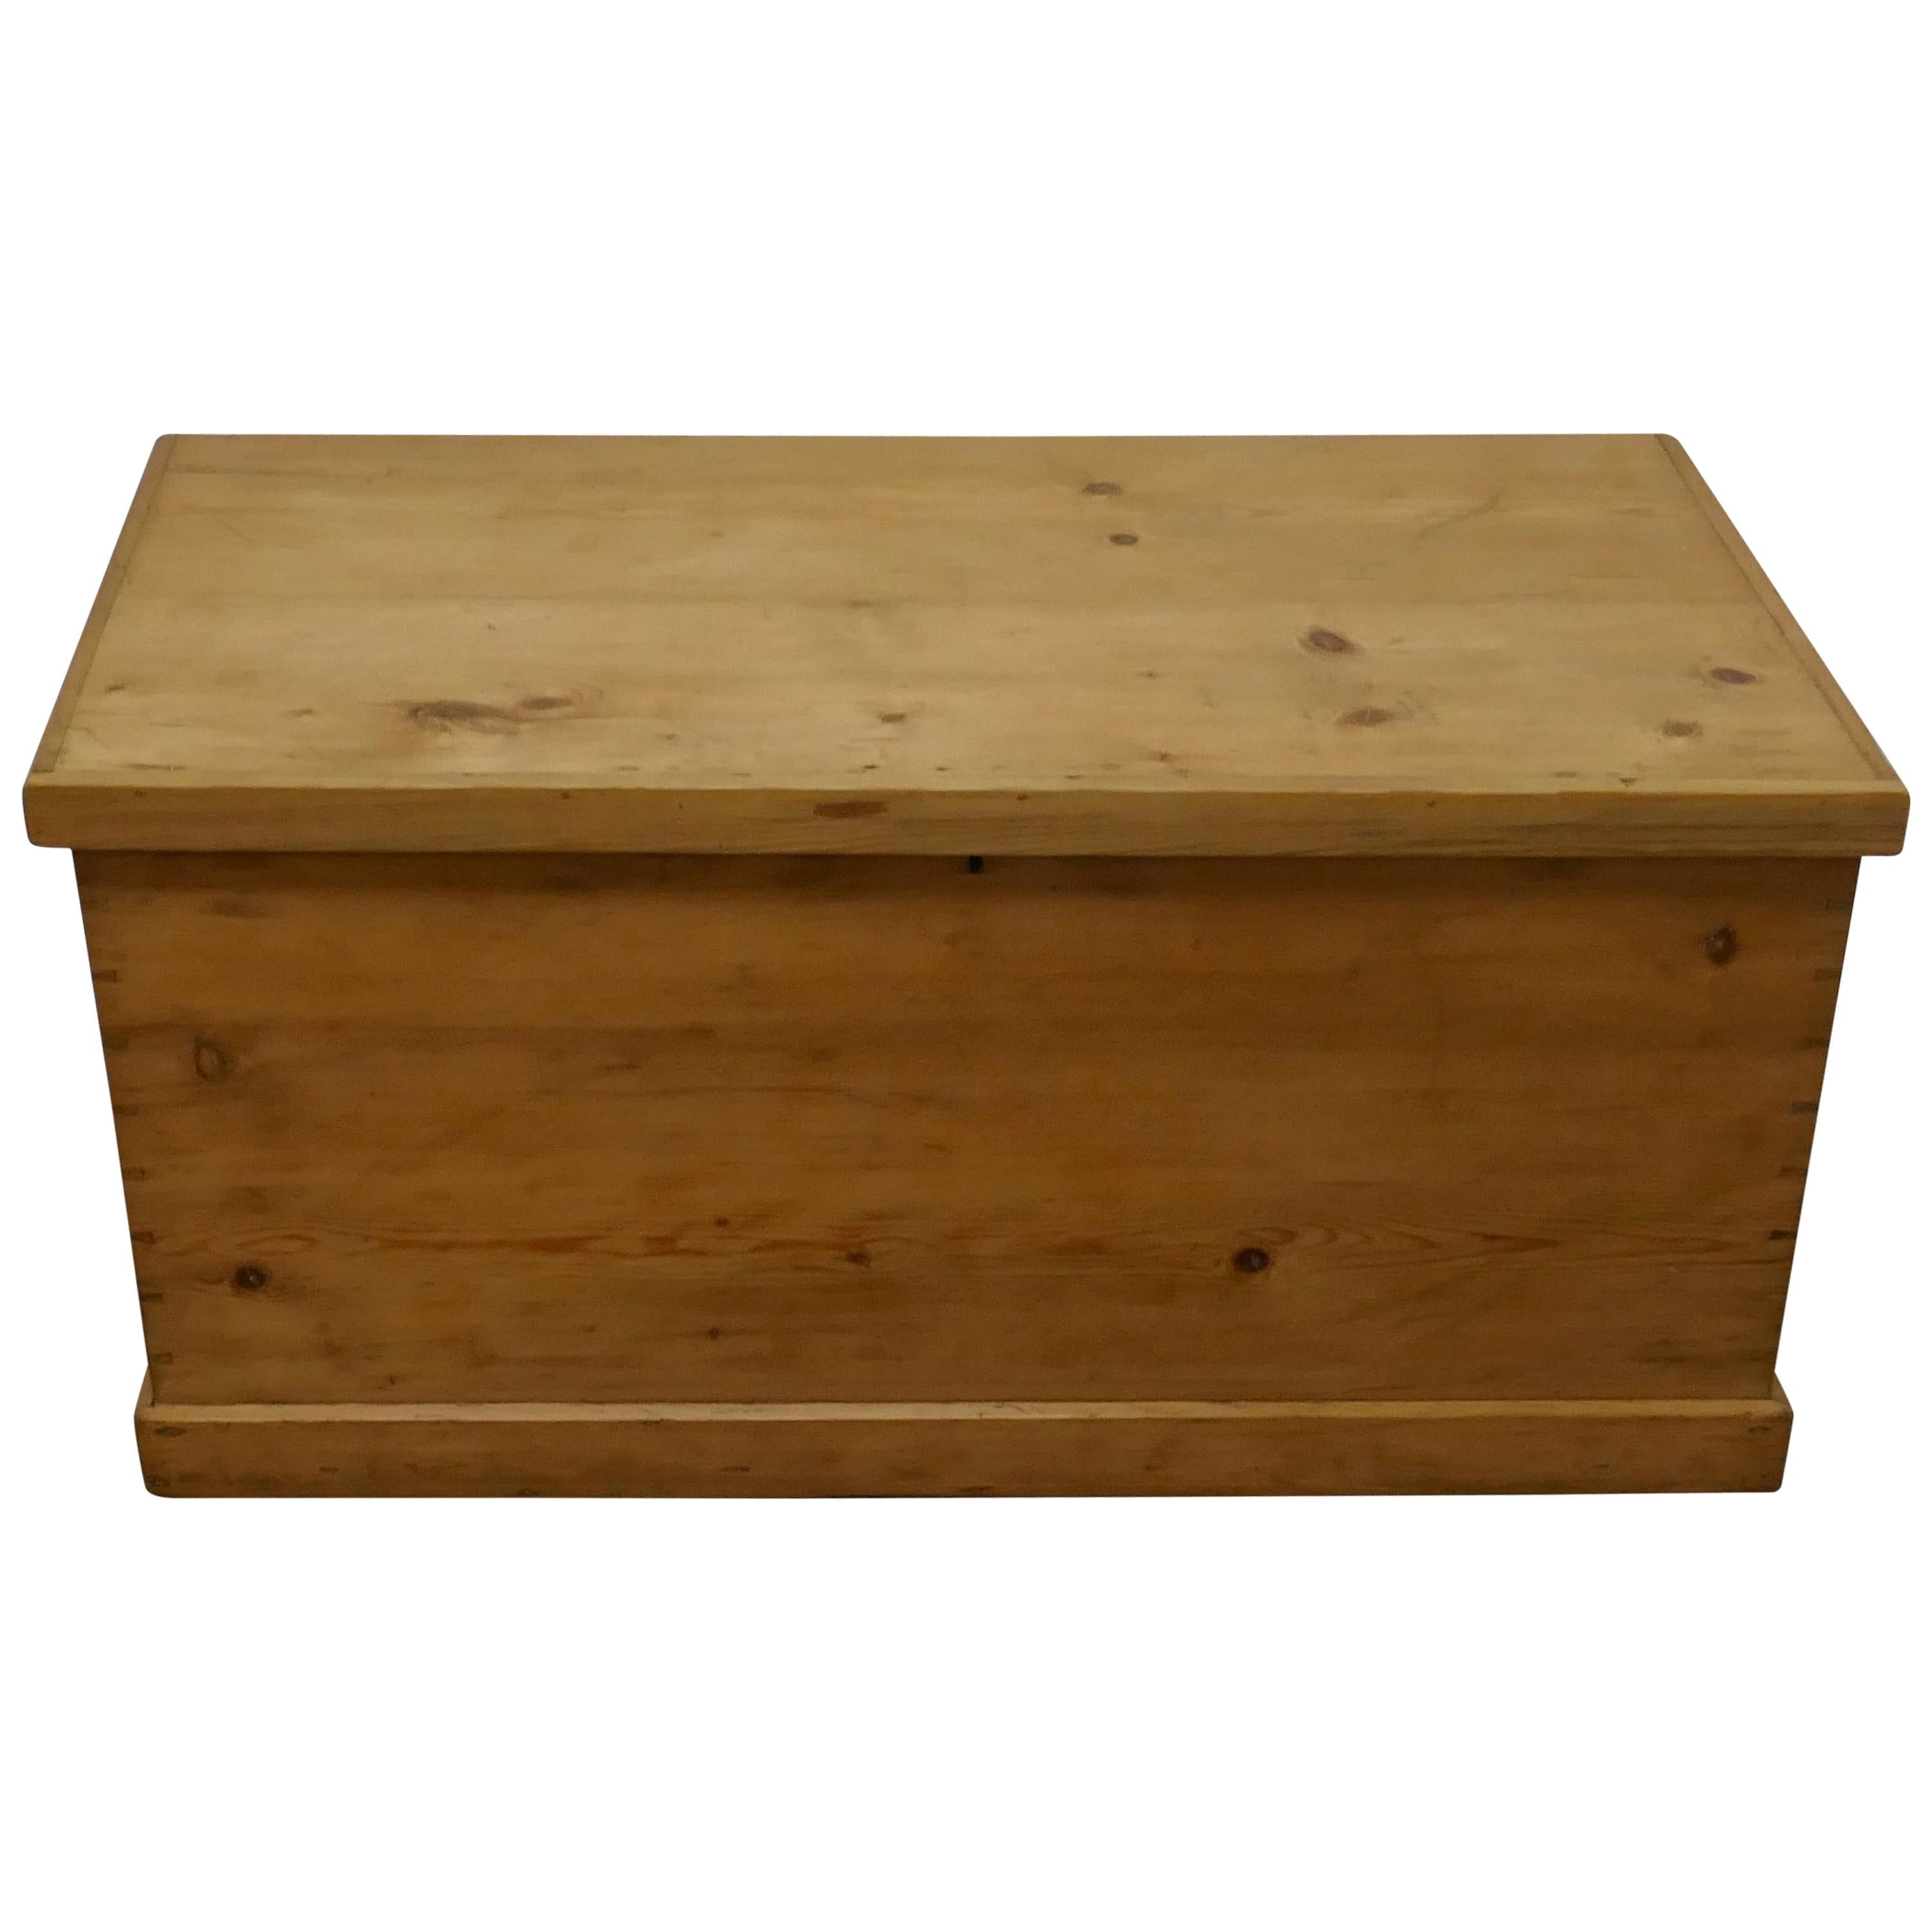 Victorian Pine Blanket Box, Coffee Table or Shoe Tidy